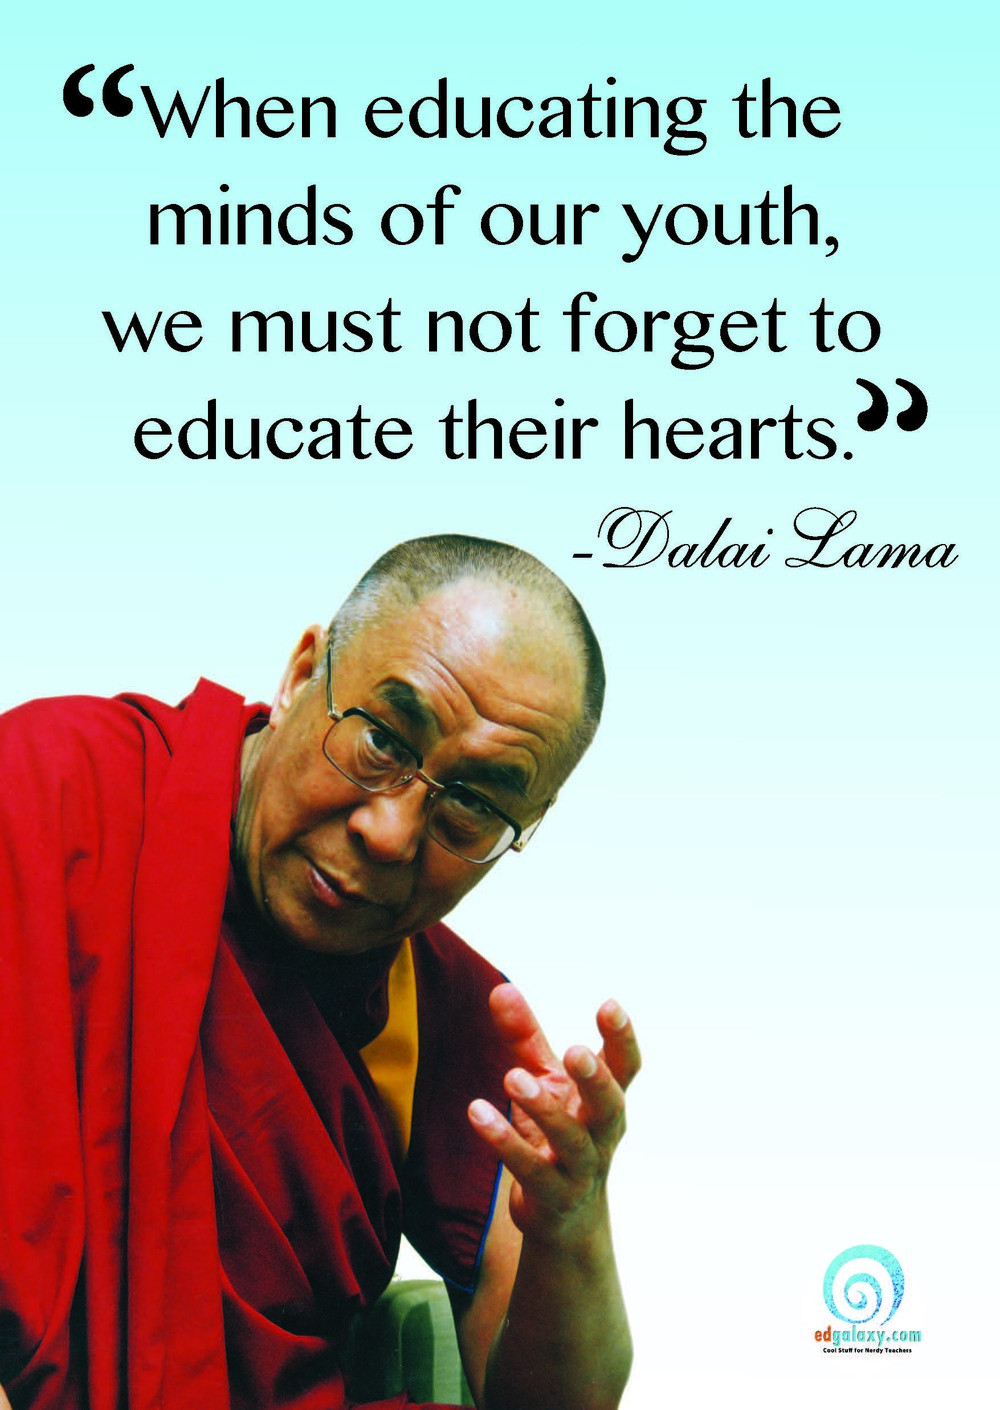 Education Quotes For Students
 Education Quotes Famous Quotes for teachers and Students